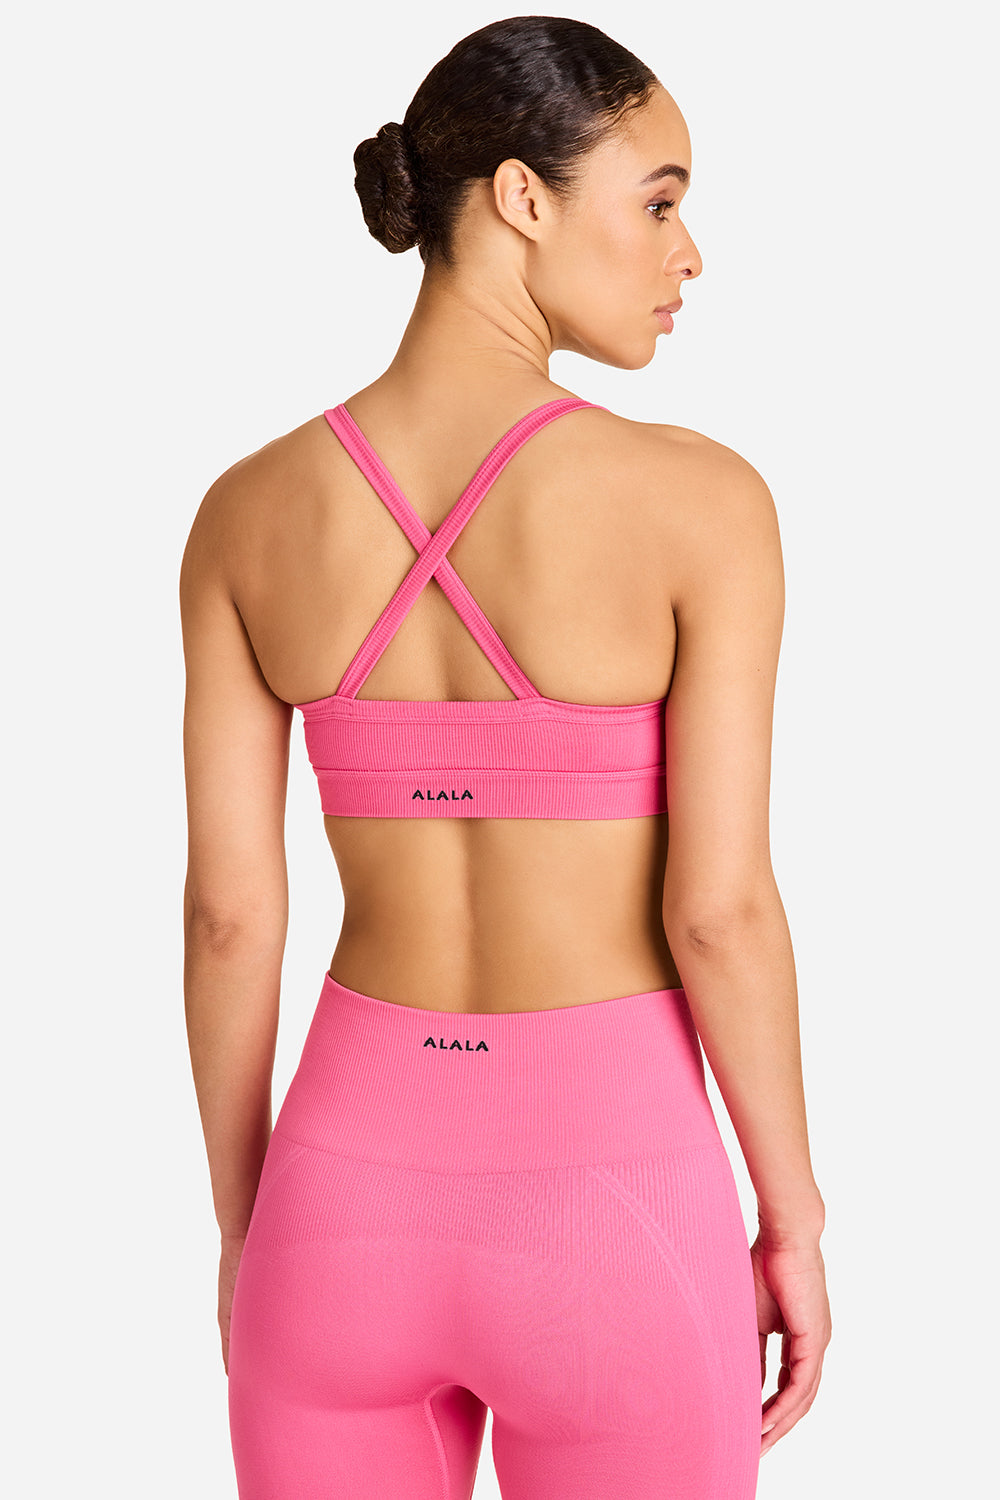 Women's Seamless Medium Support Cami Midline Sports Bra - All In Motion™  Pink S